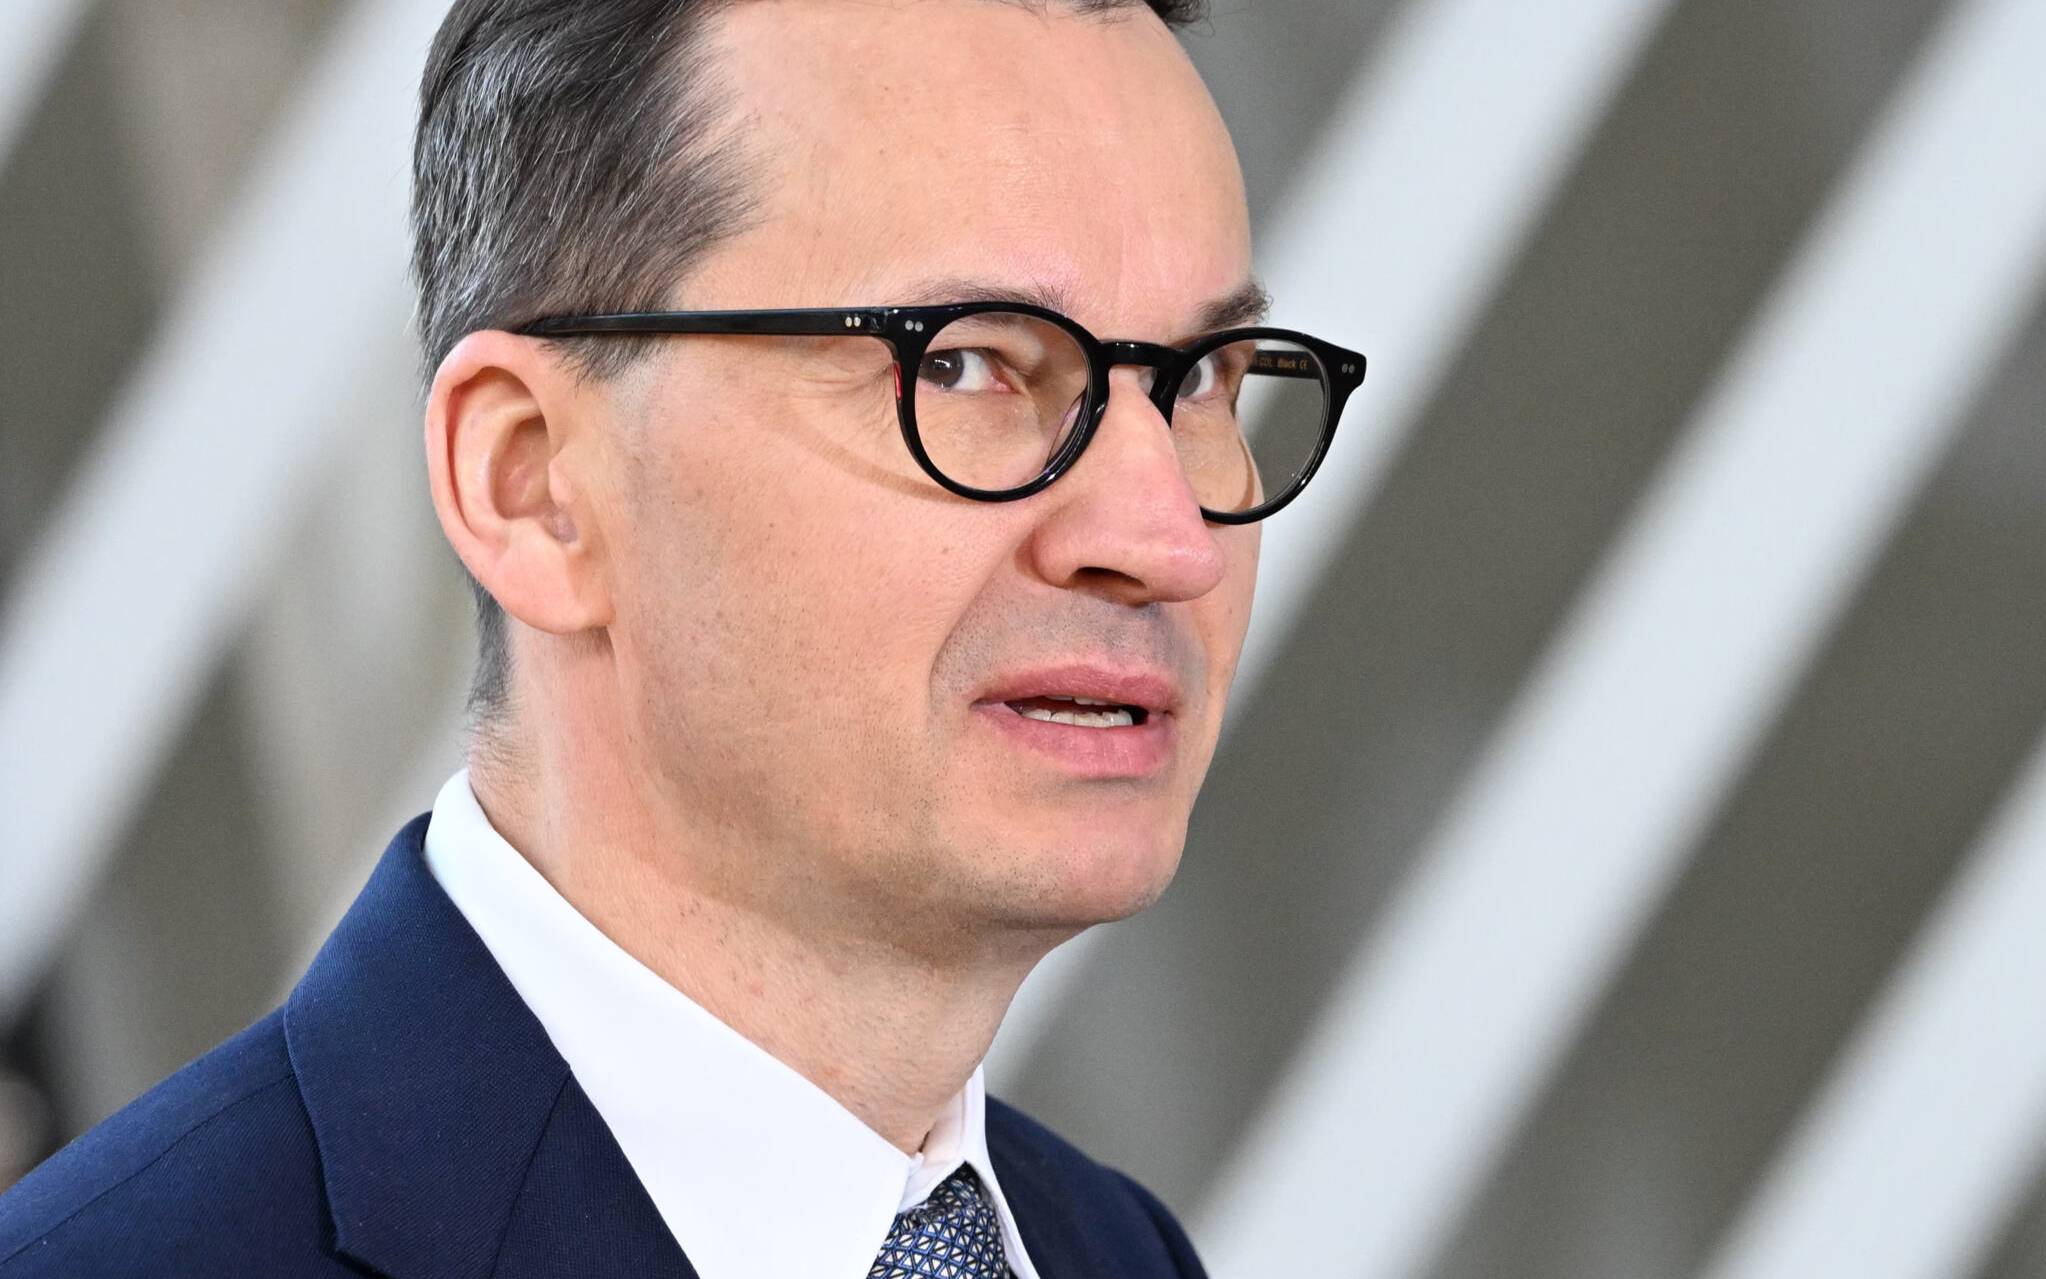 Poland's Prime Minister Mateusz Morawiecki arrives ahead of EU leaders extraordinary meeting to discuss Ukraine, defence and energy in Brussels, on May 31, 2022. (Photo by Emmanuel DUNAND / AFP)